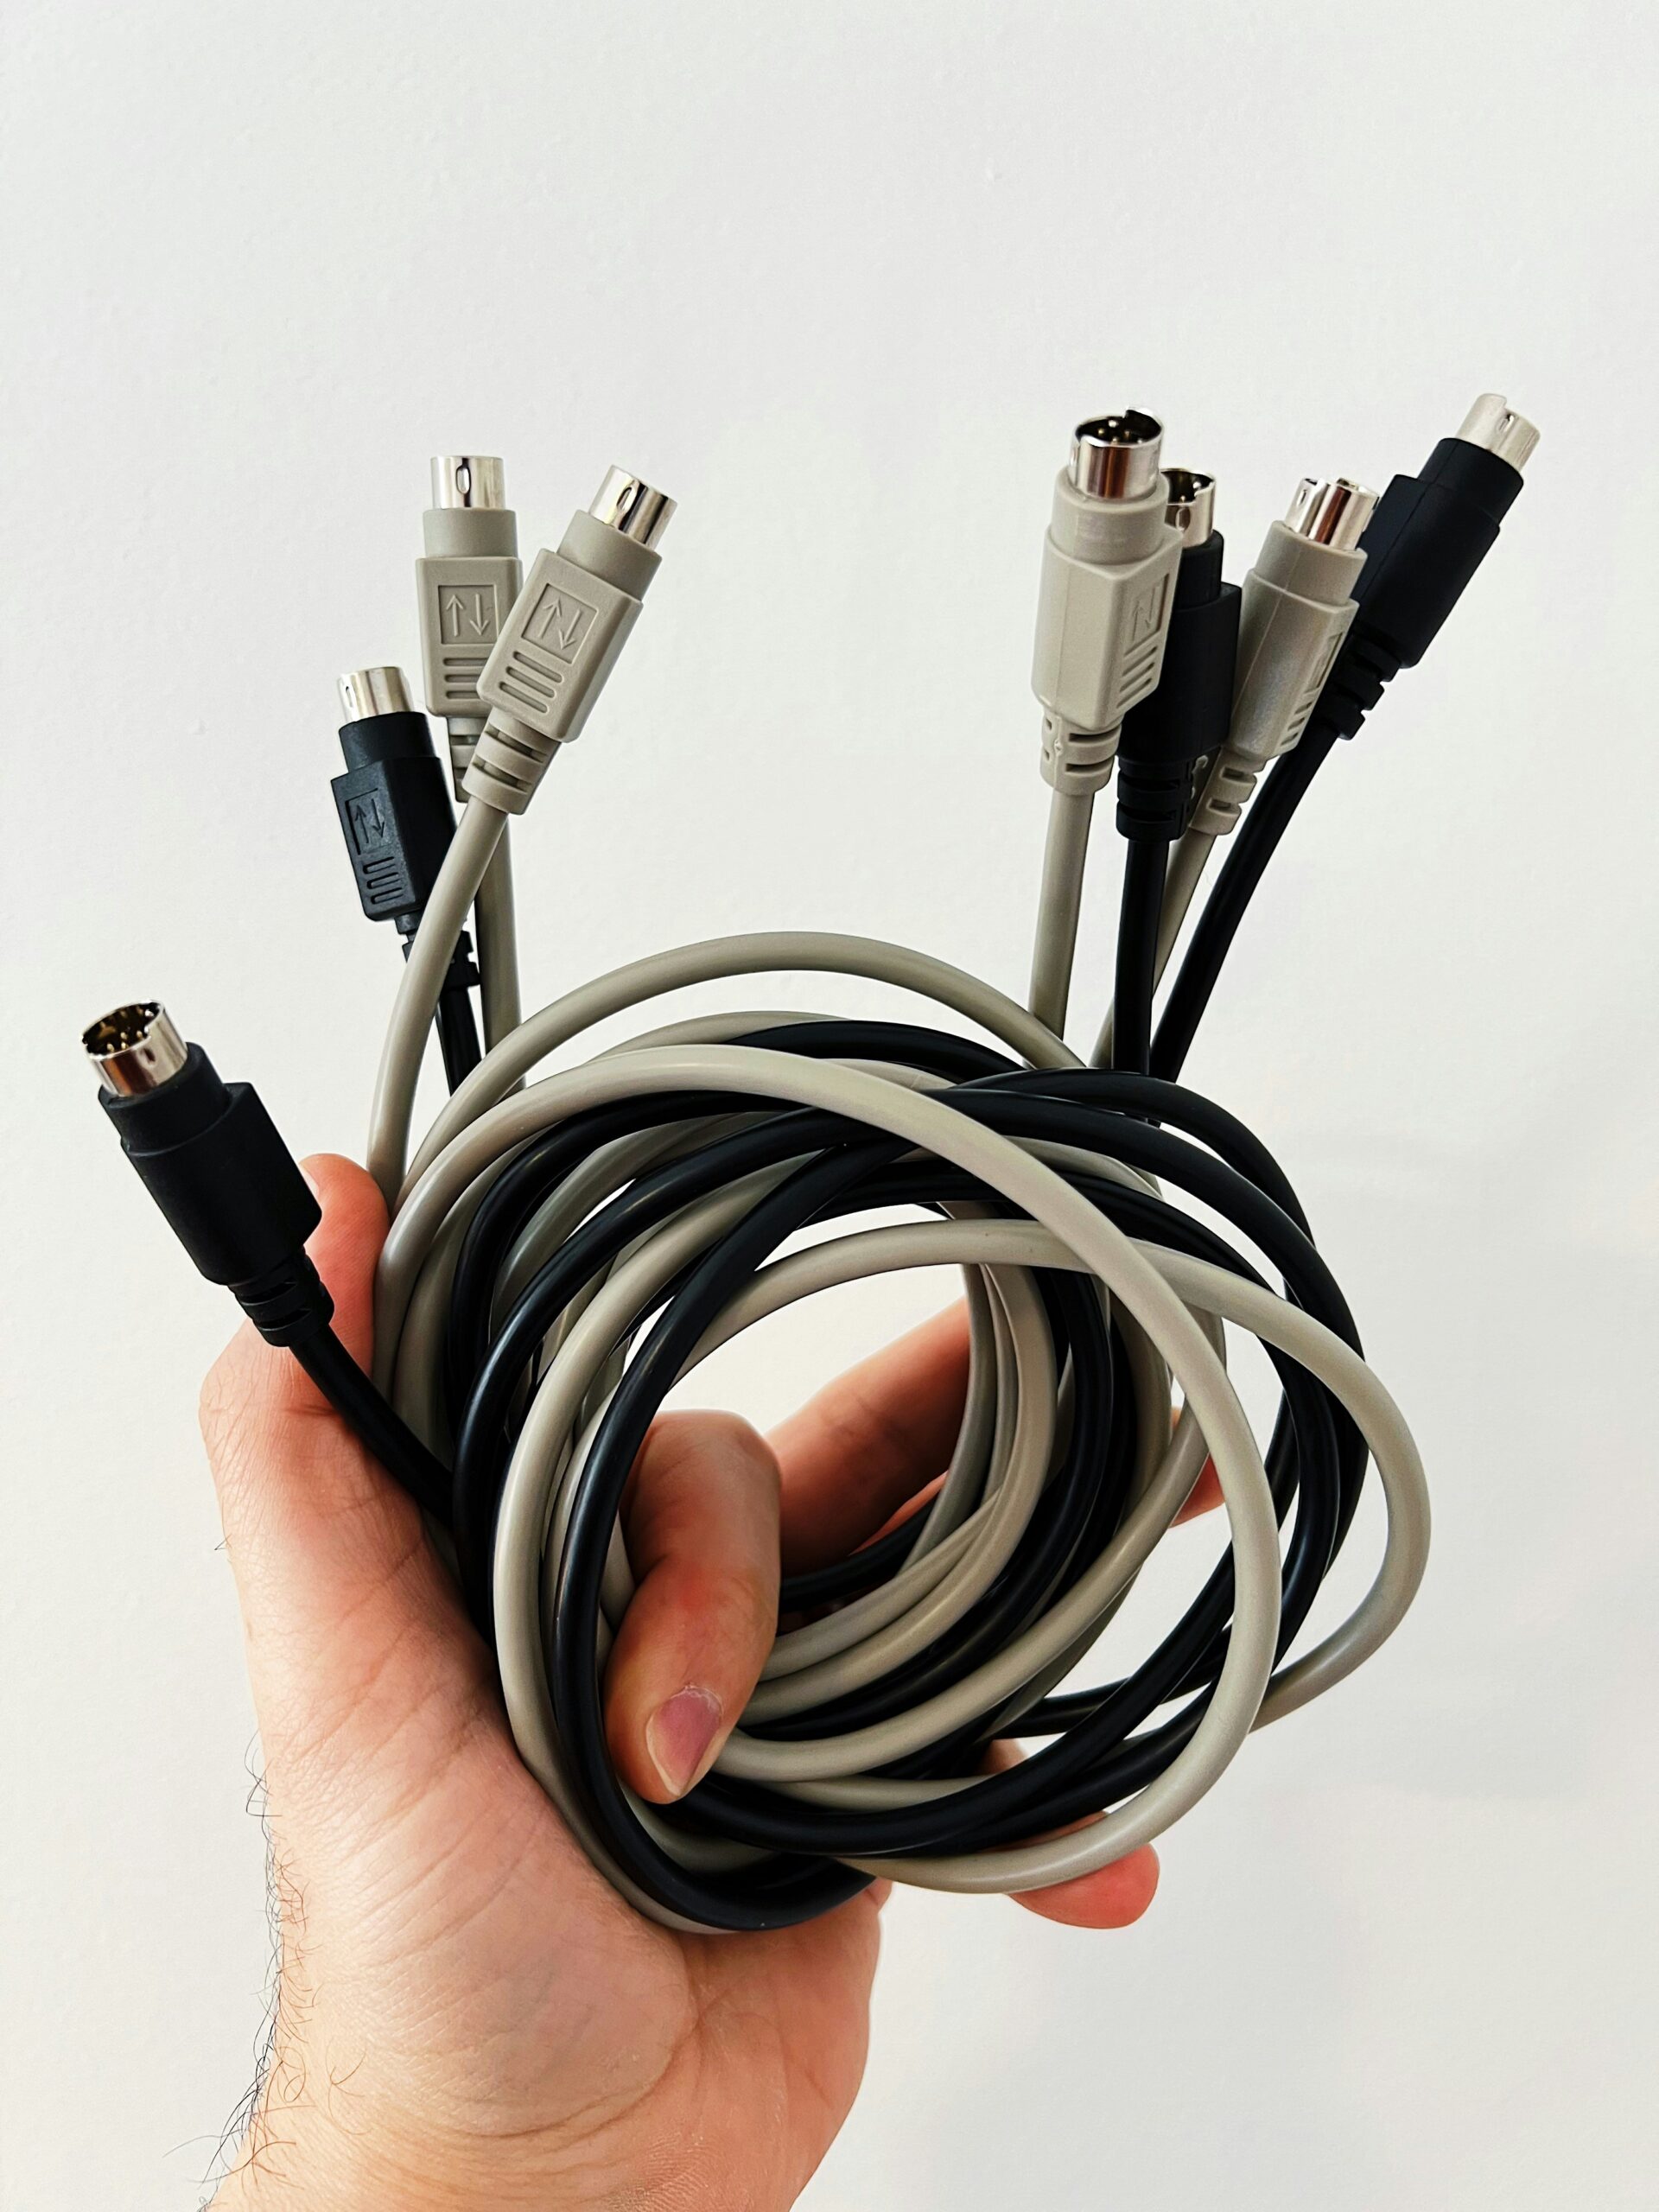 Cables tangled without a Universal Cable Management Kit